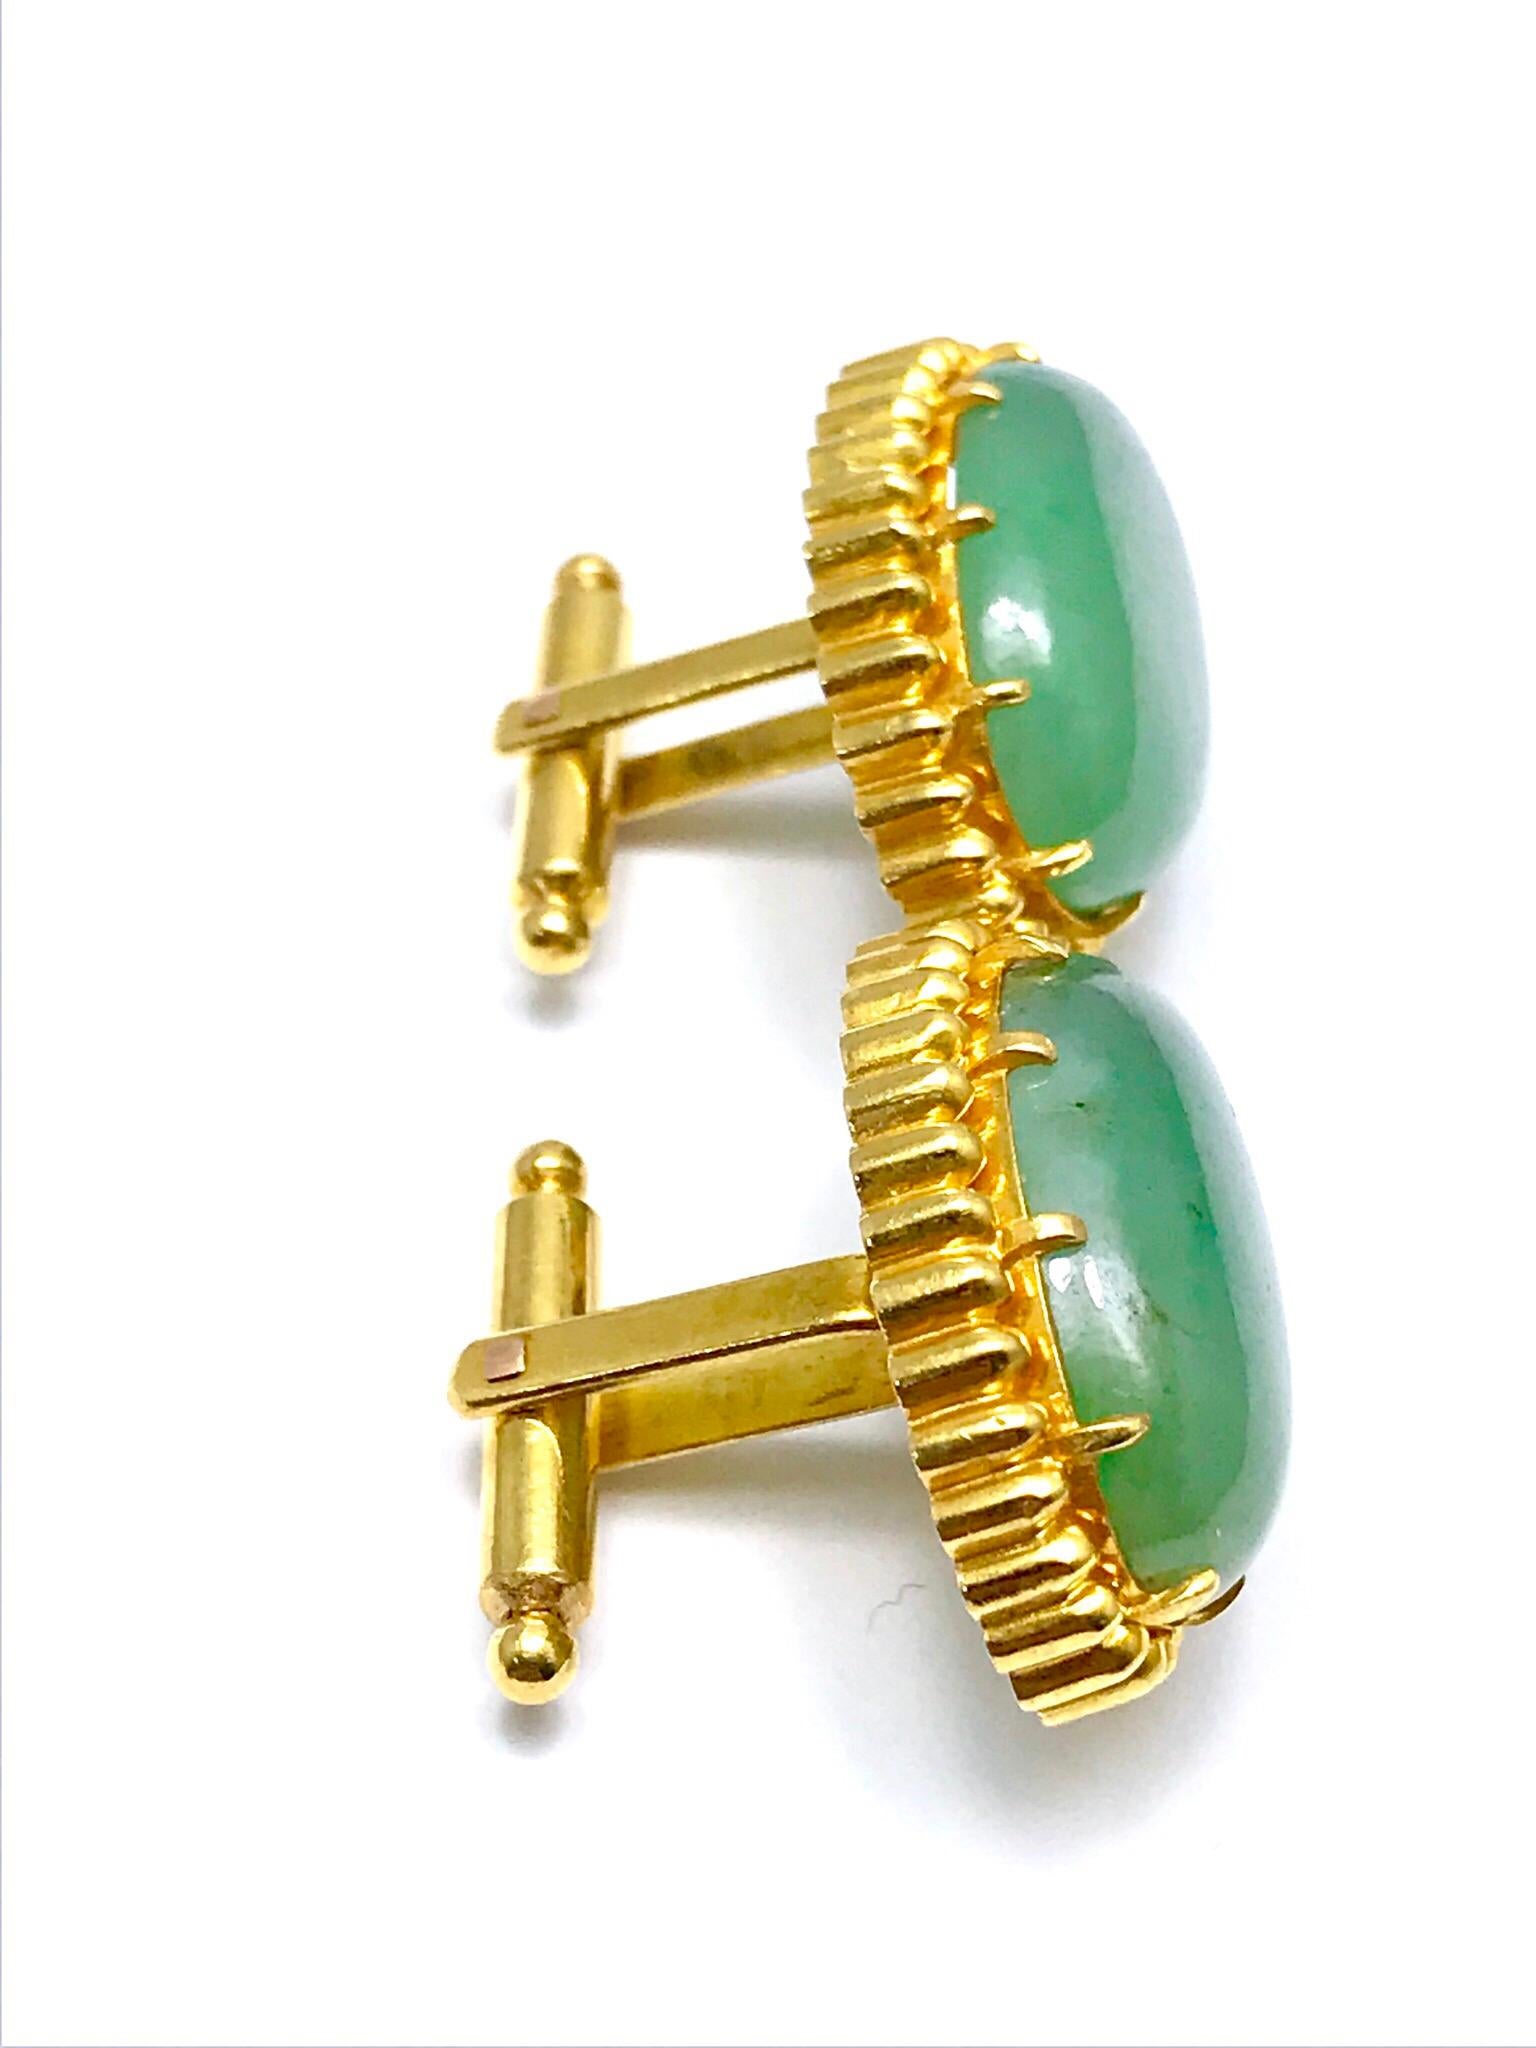 Oval Cut Oval Cabochon Jade and 18 Karat Yellow Gold Cufflink Set For Sale